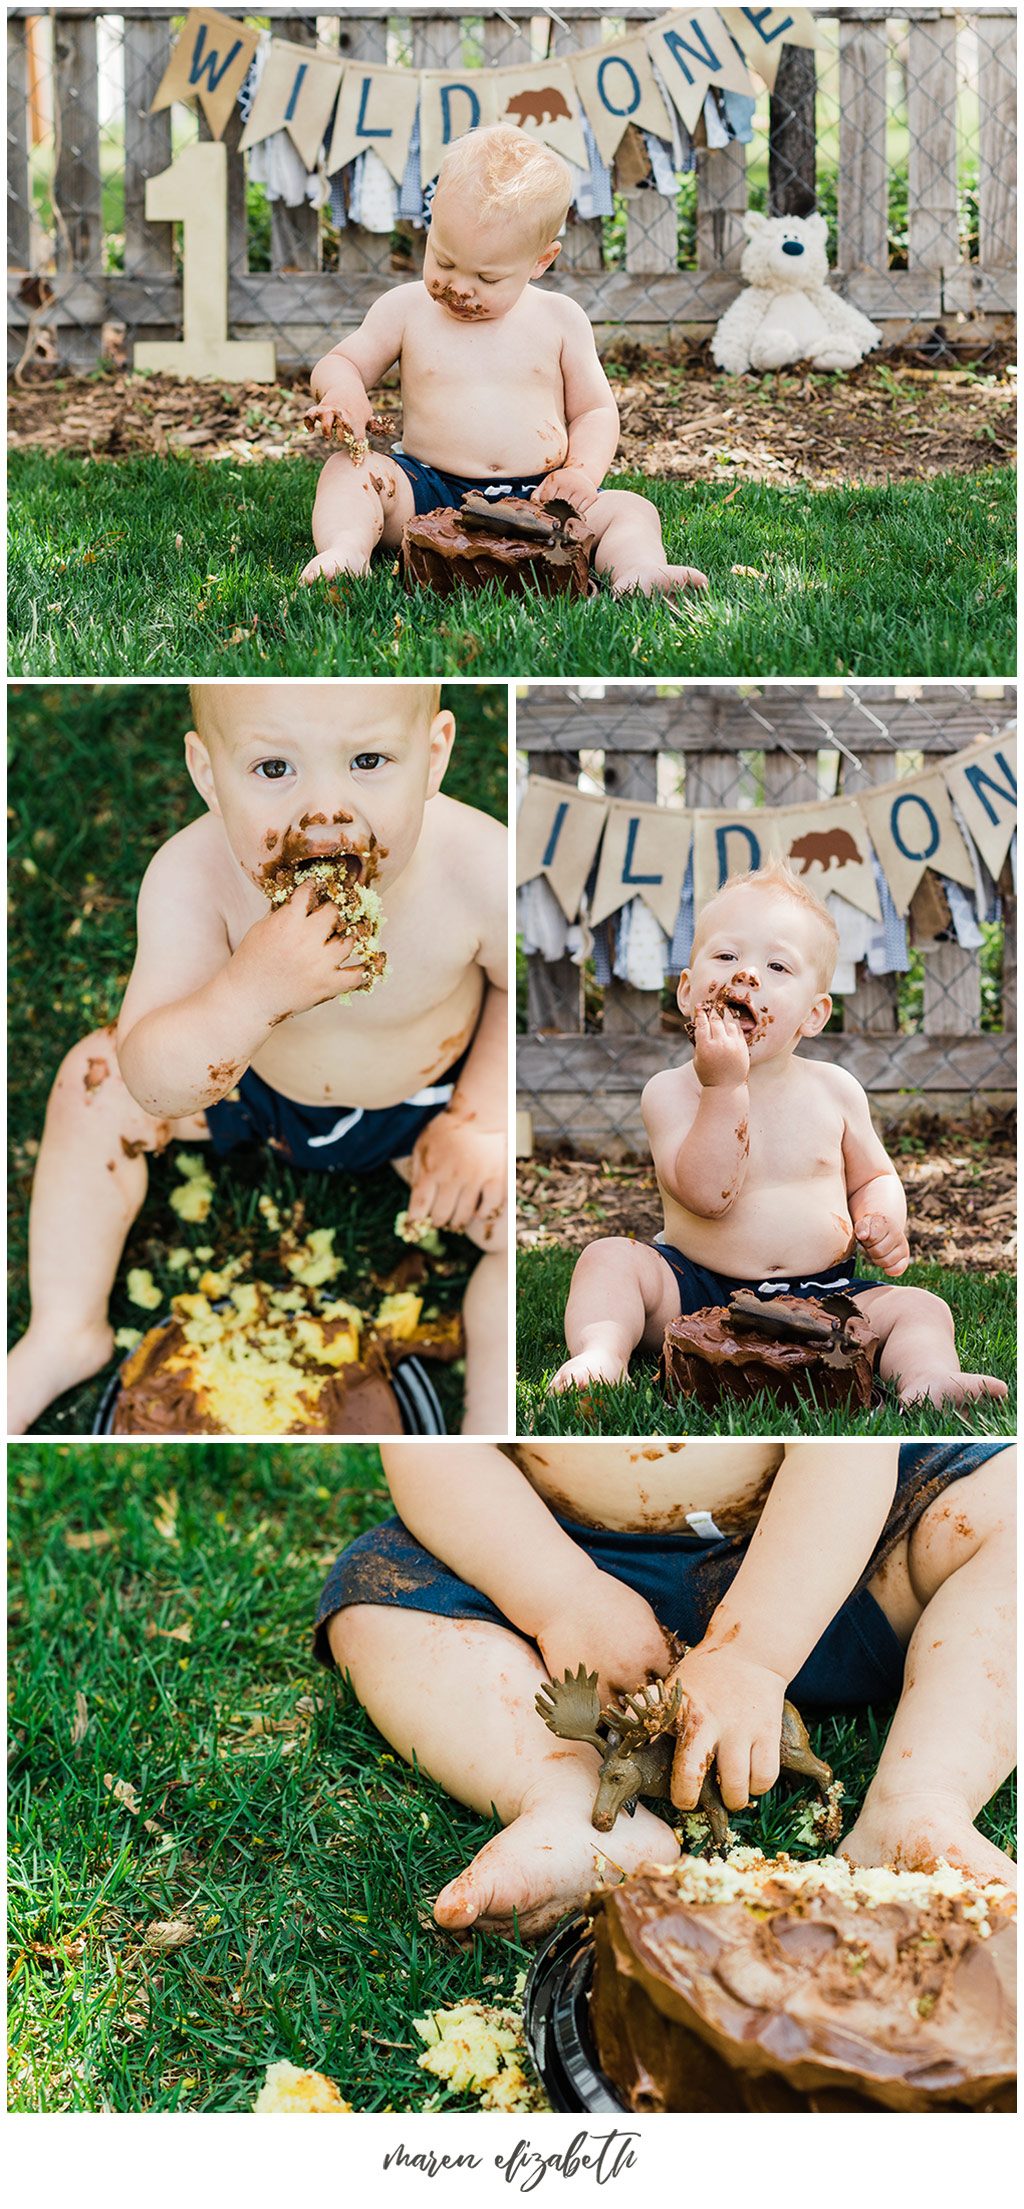 Outdoor, Wild One, little boy cake smash captured by Maren Elizabeth Photography. I love doing cake smashes outside because it makes clean up so easy! | Arizona Family Photographer